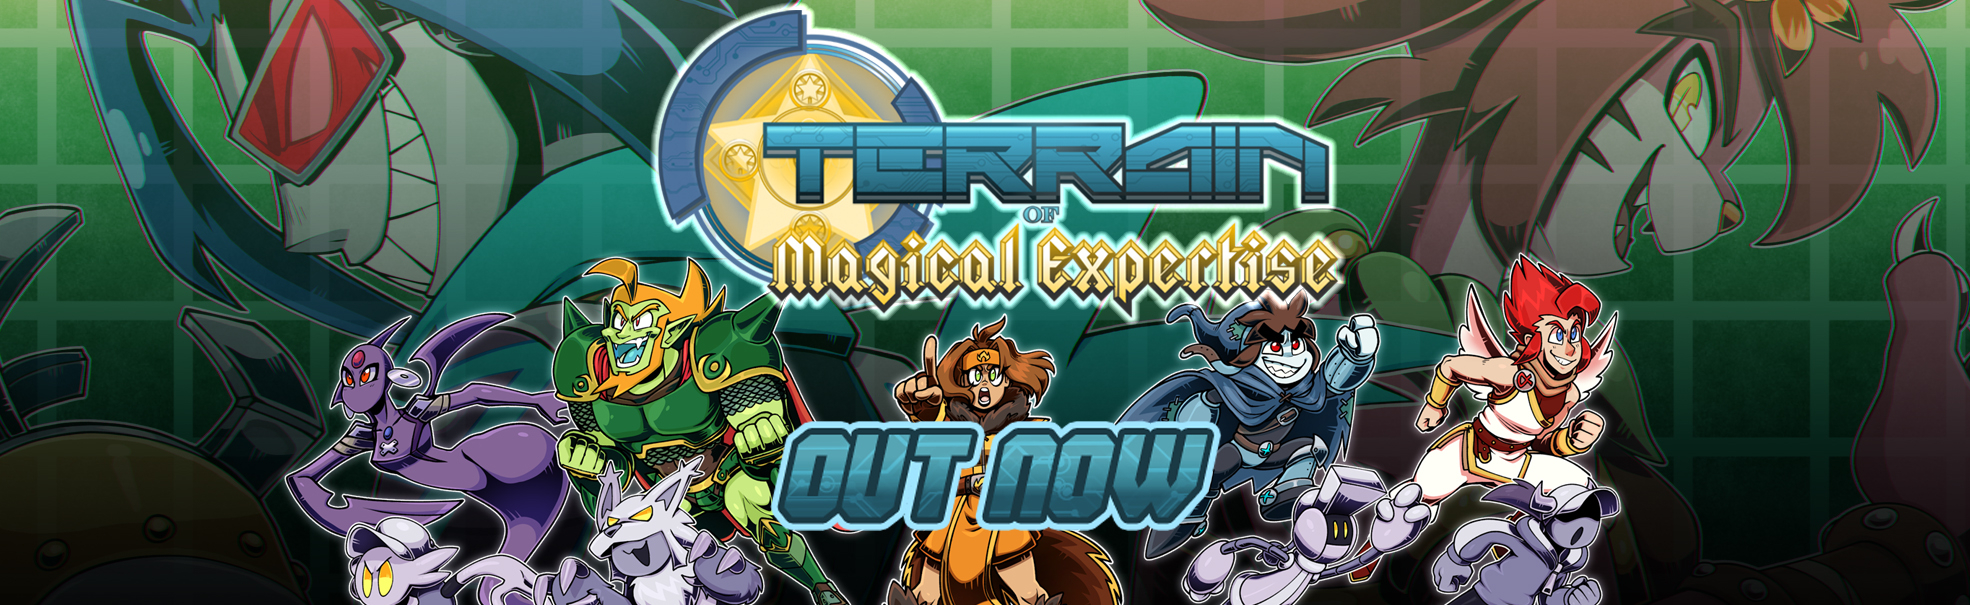 Terrans Of Magical Expertise - Out Now!